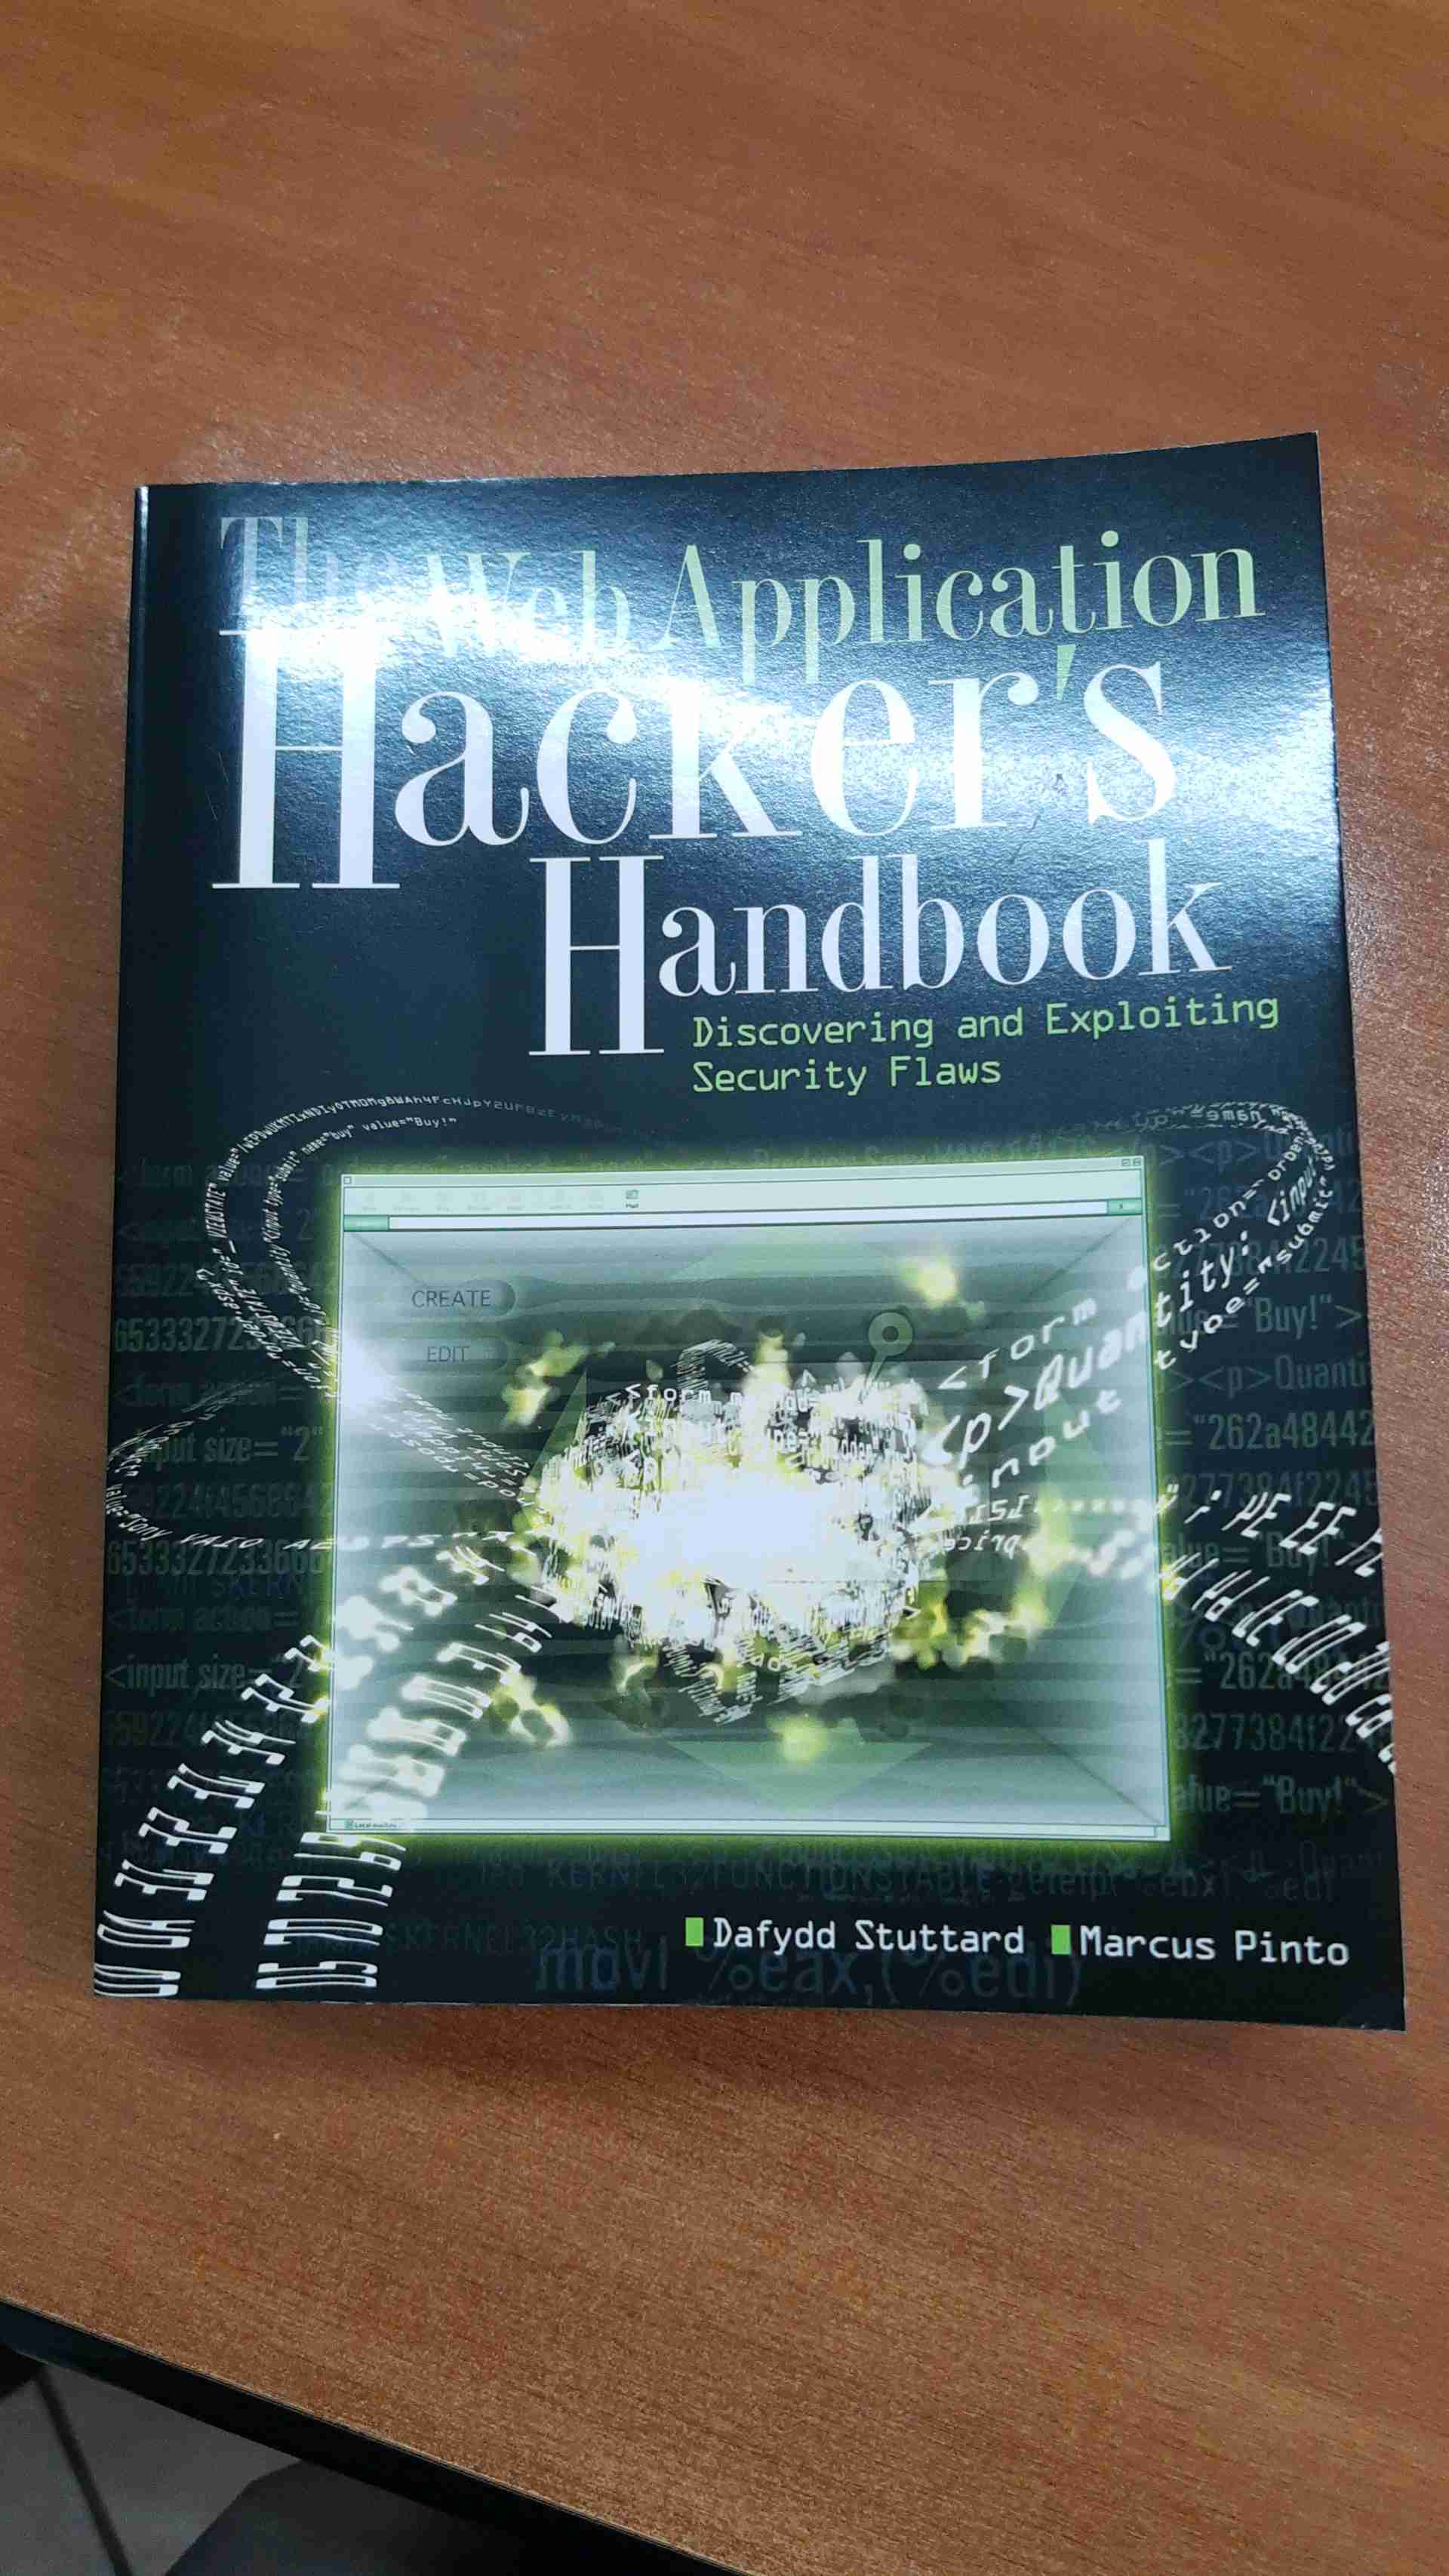 The Web Application Hacker's Handbook: Discovering and Exploiting Security Flaws